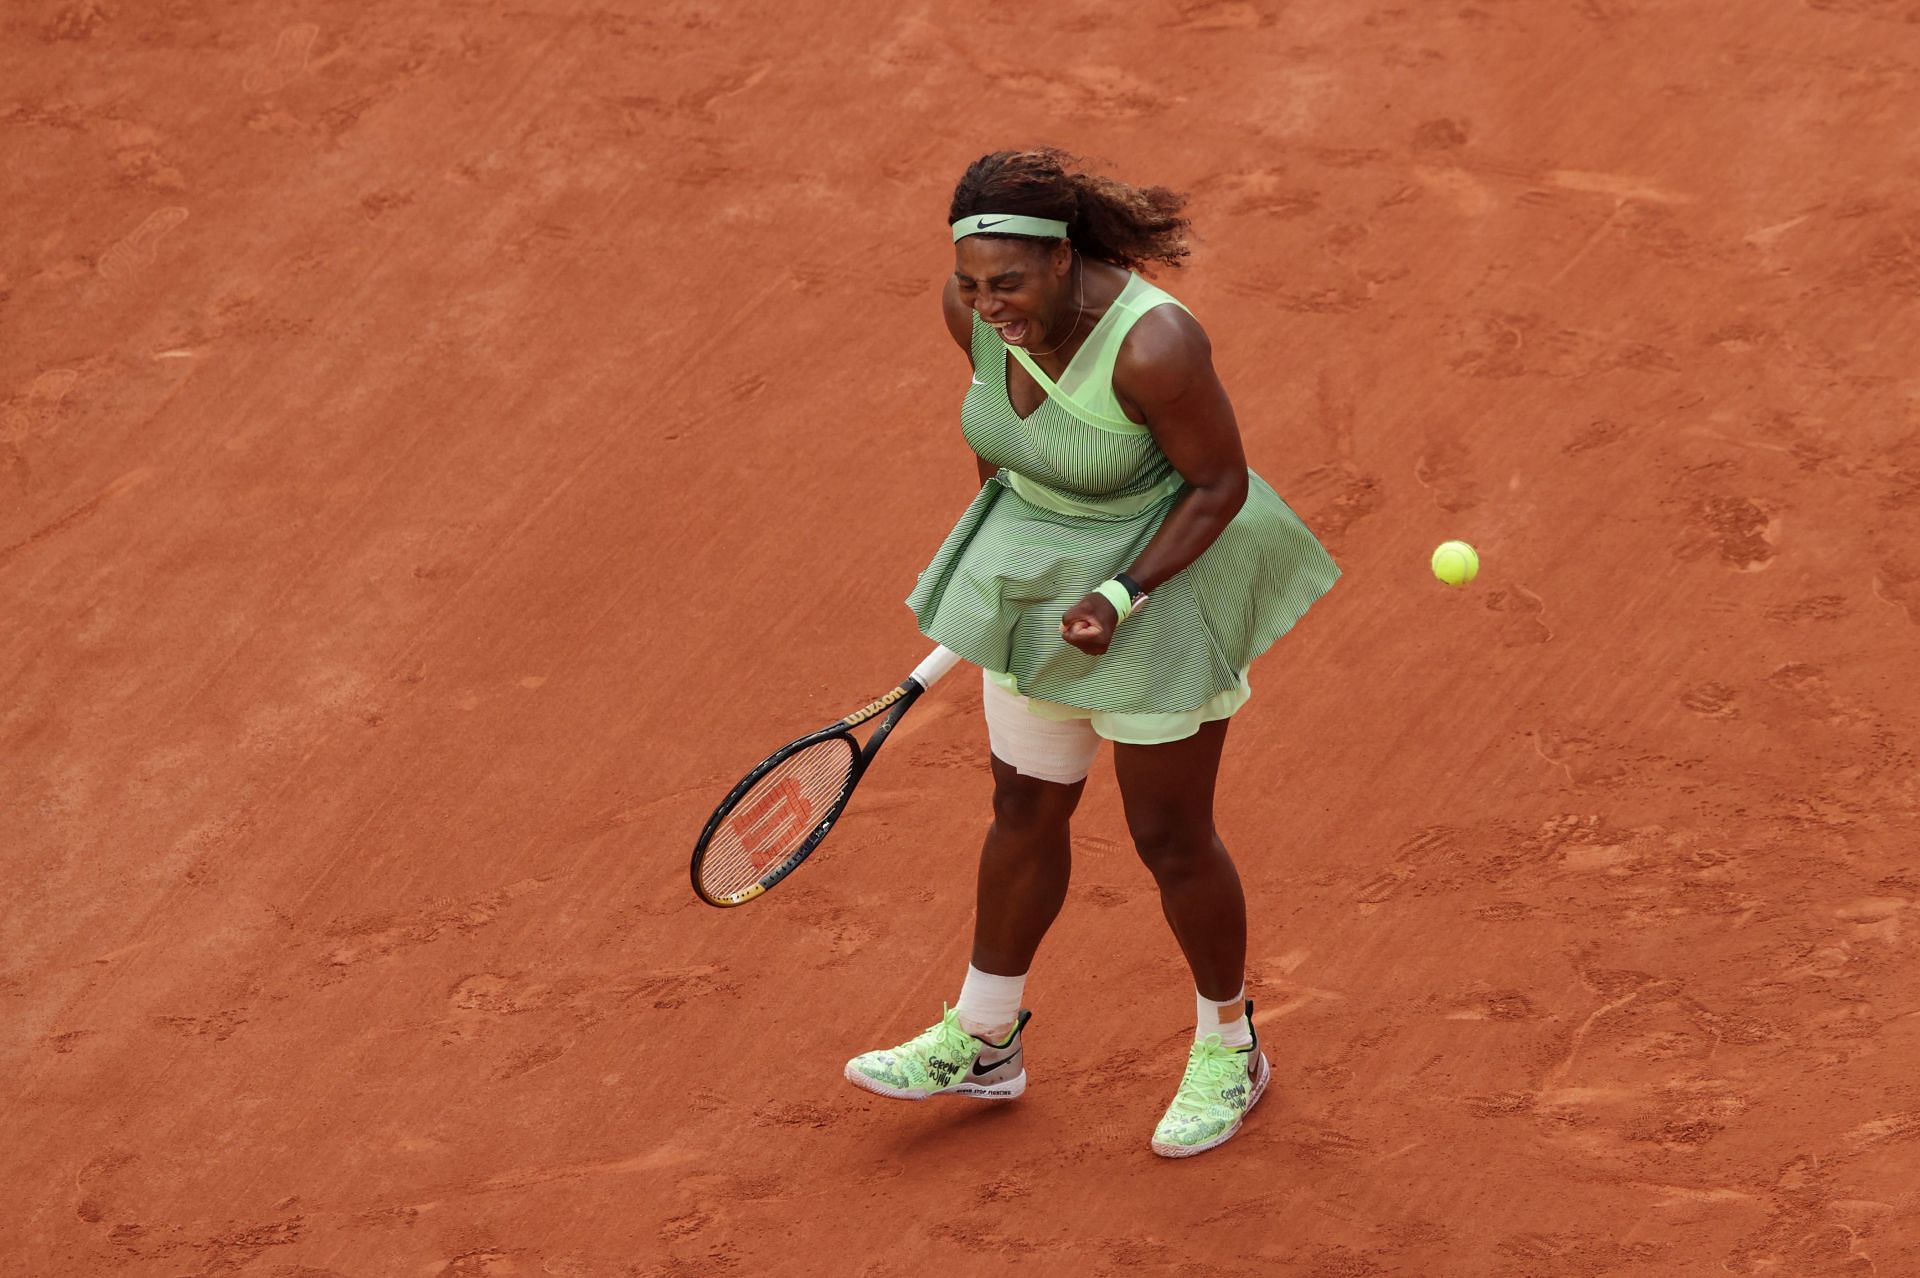 Serena Williams at the French Open 2021